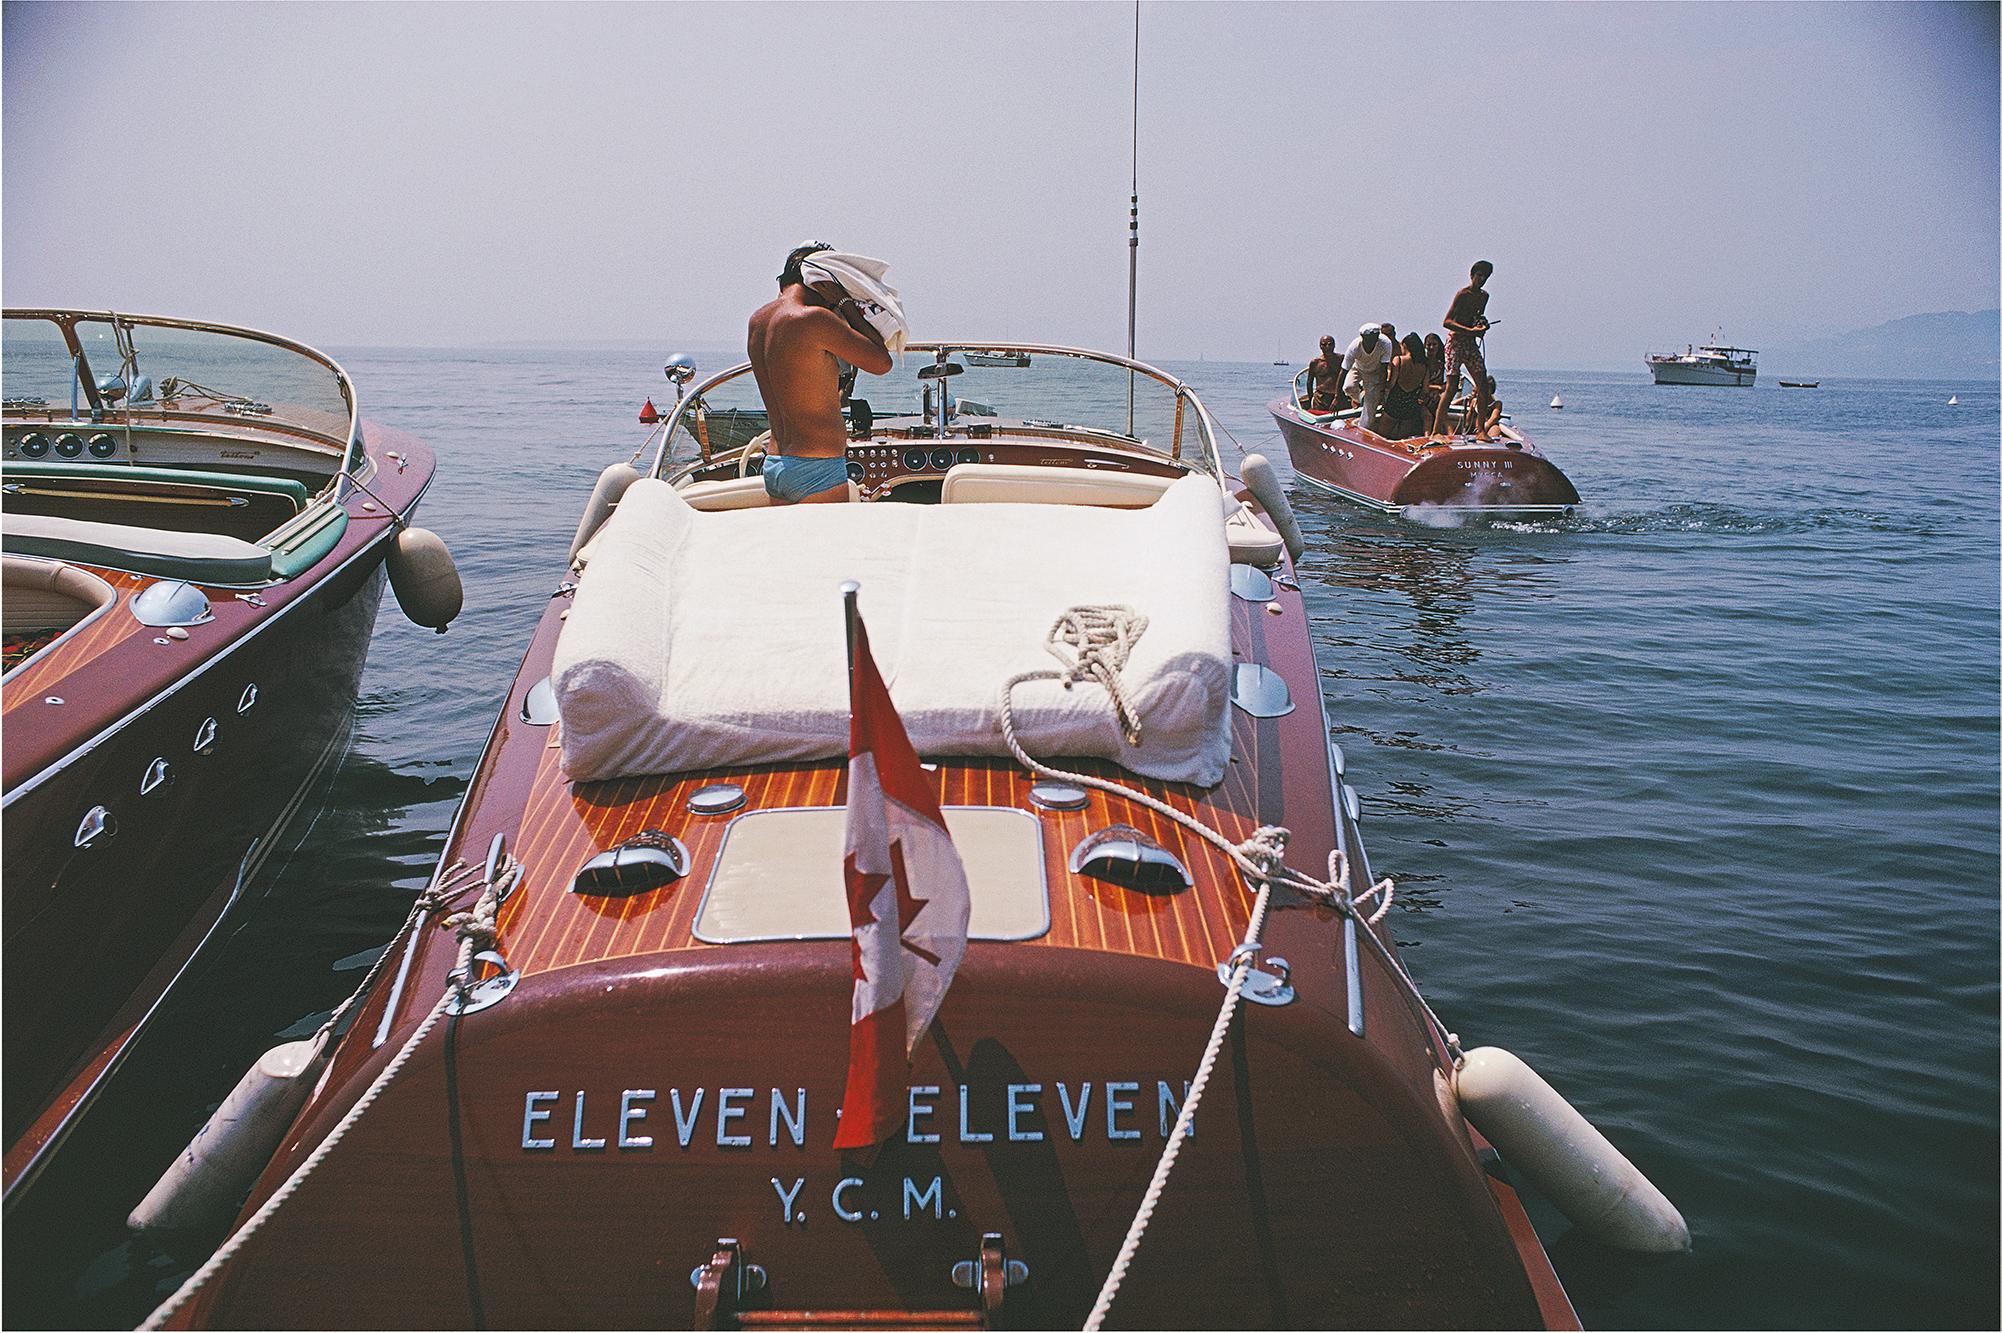 Slim Aarons
Motorboats in Antibes
1969 (printed later)
C print 
Estate stamped and numbered edition of 150 
with Certificate of authenticity

Motorboats moored on the coast near the Hotel du Cap-Eden-Roc in Antibes on the French Riviera, August